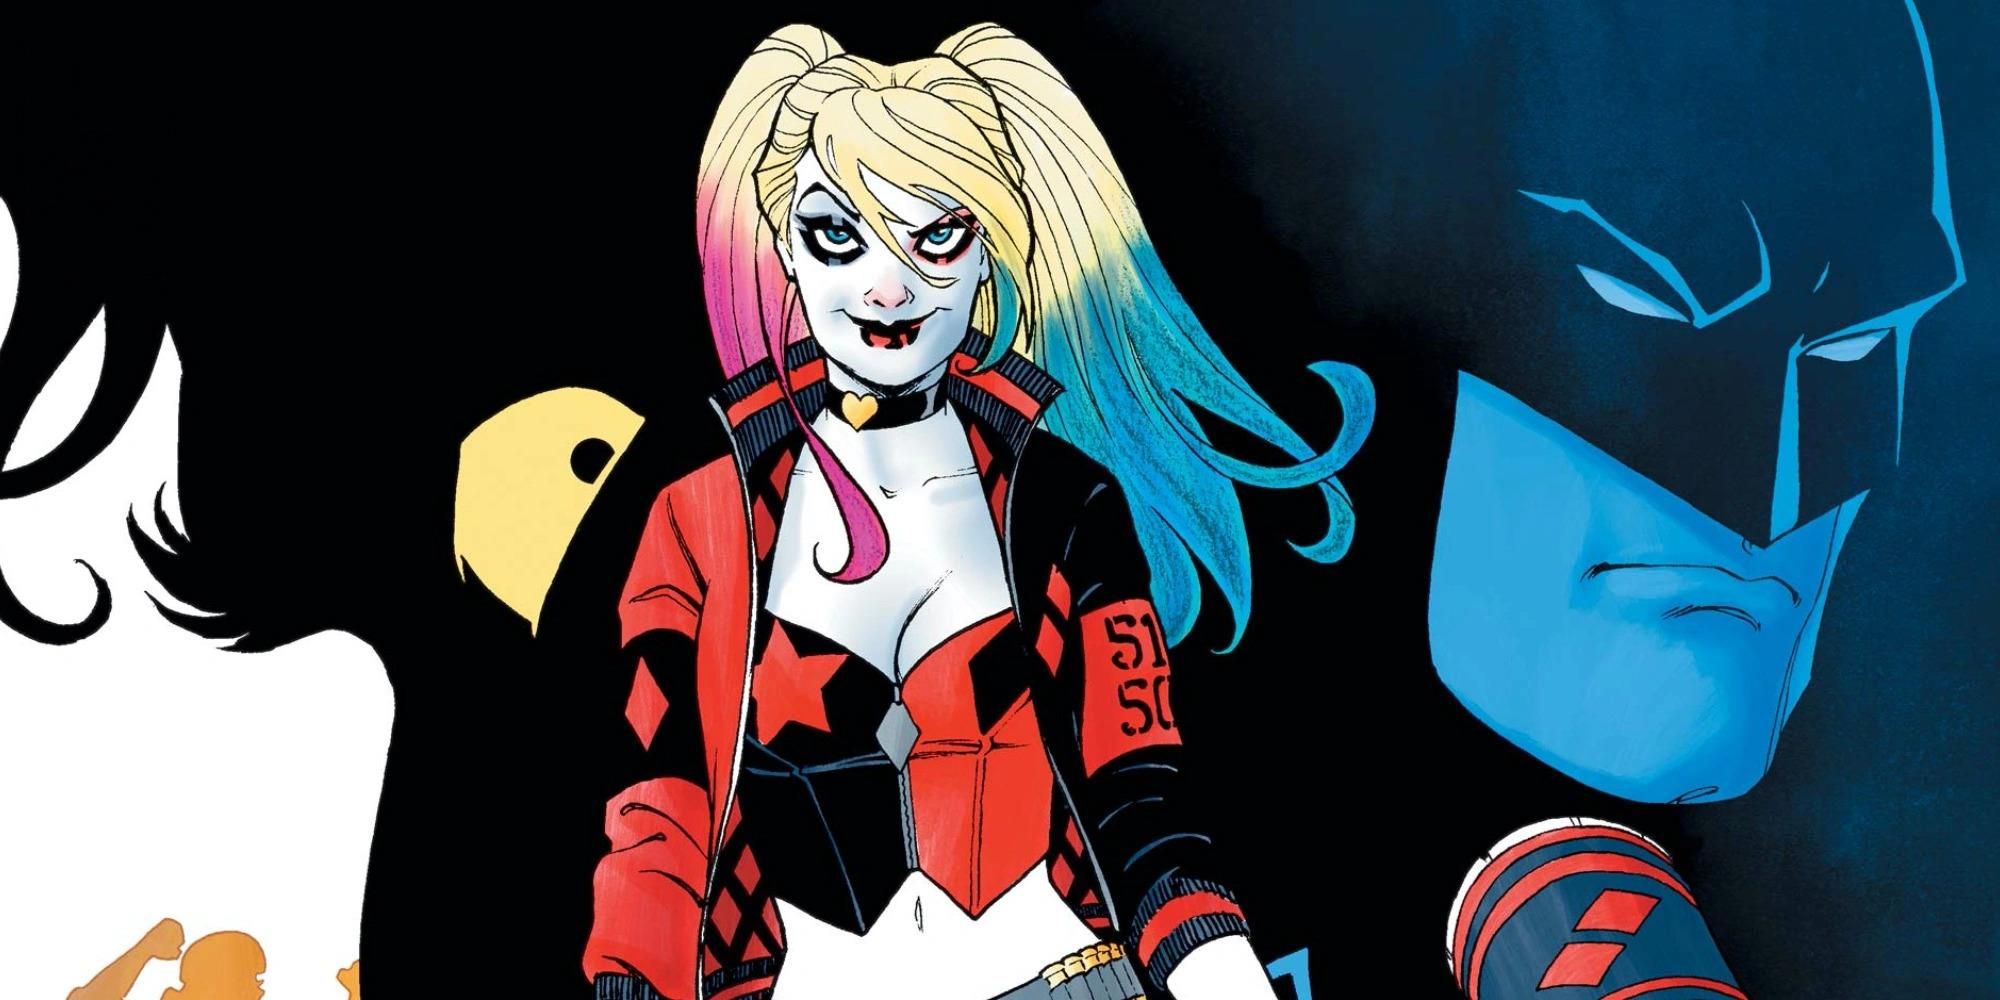 DC's Harley Quinn comic book appearance in front of Batman head